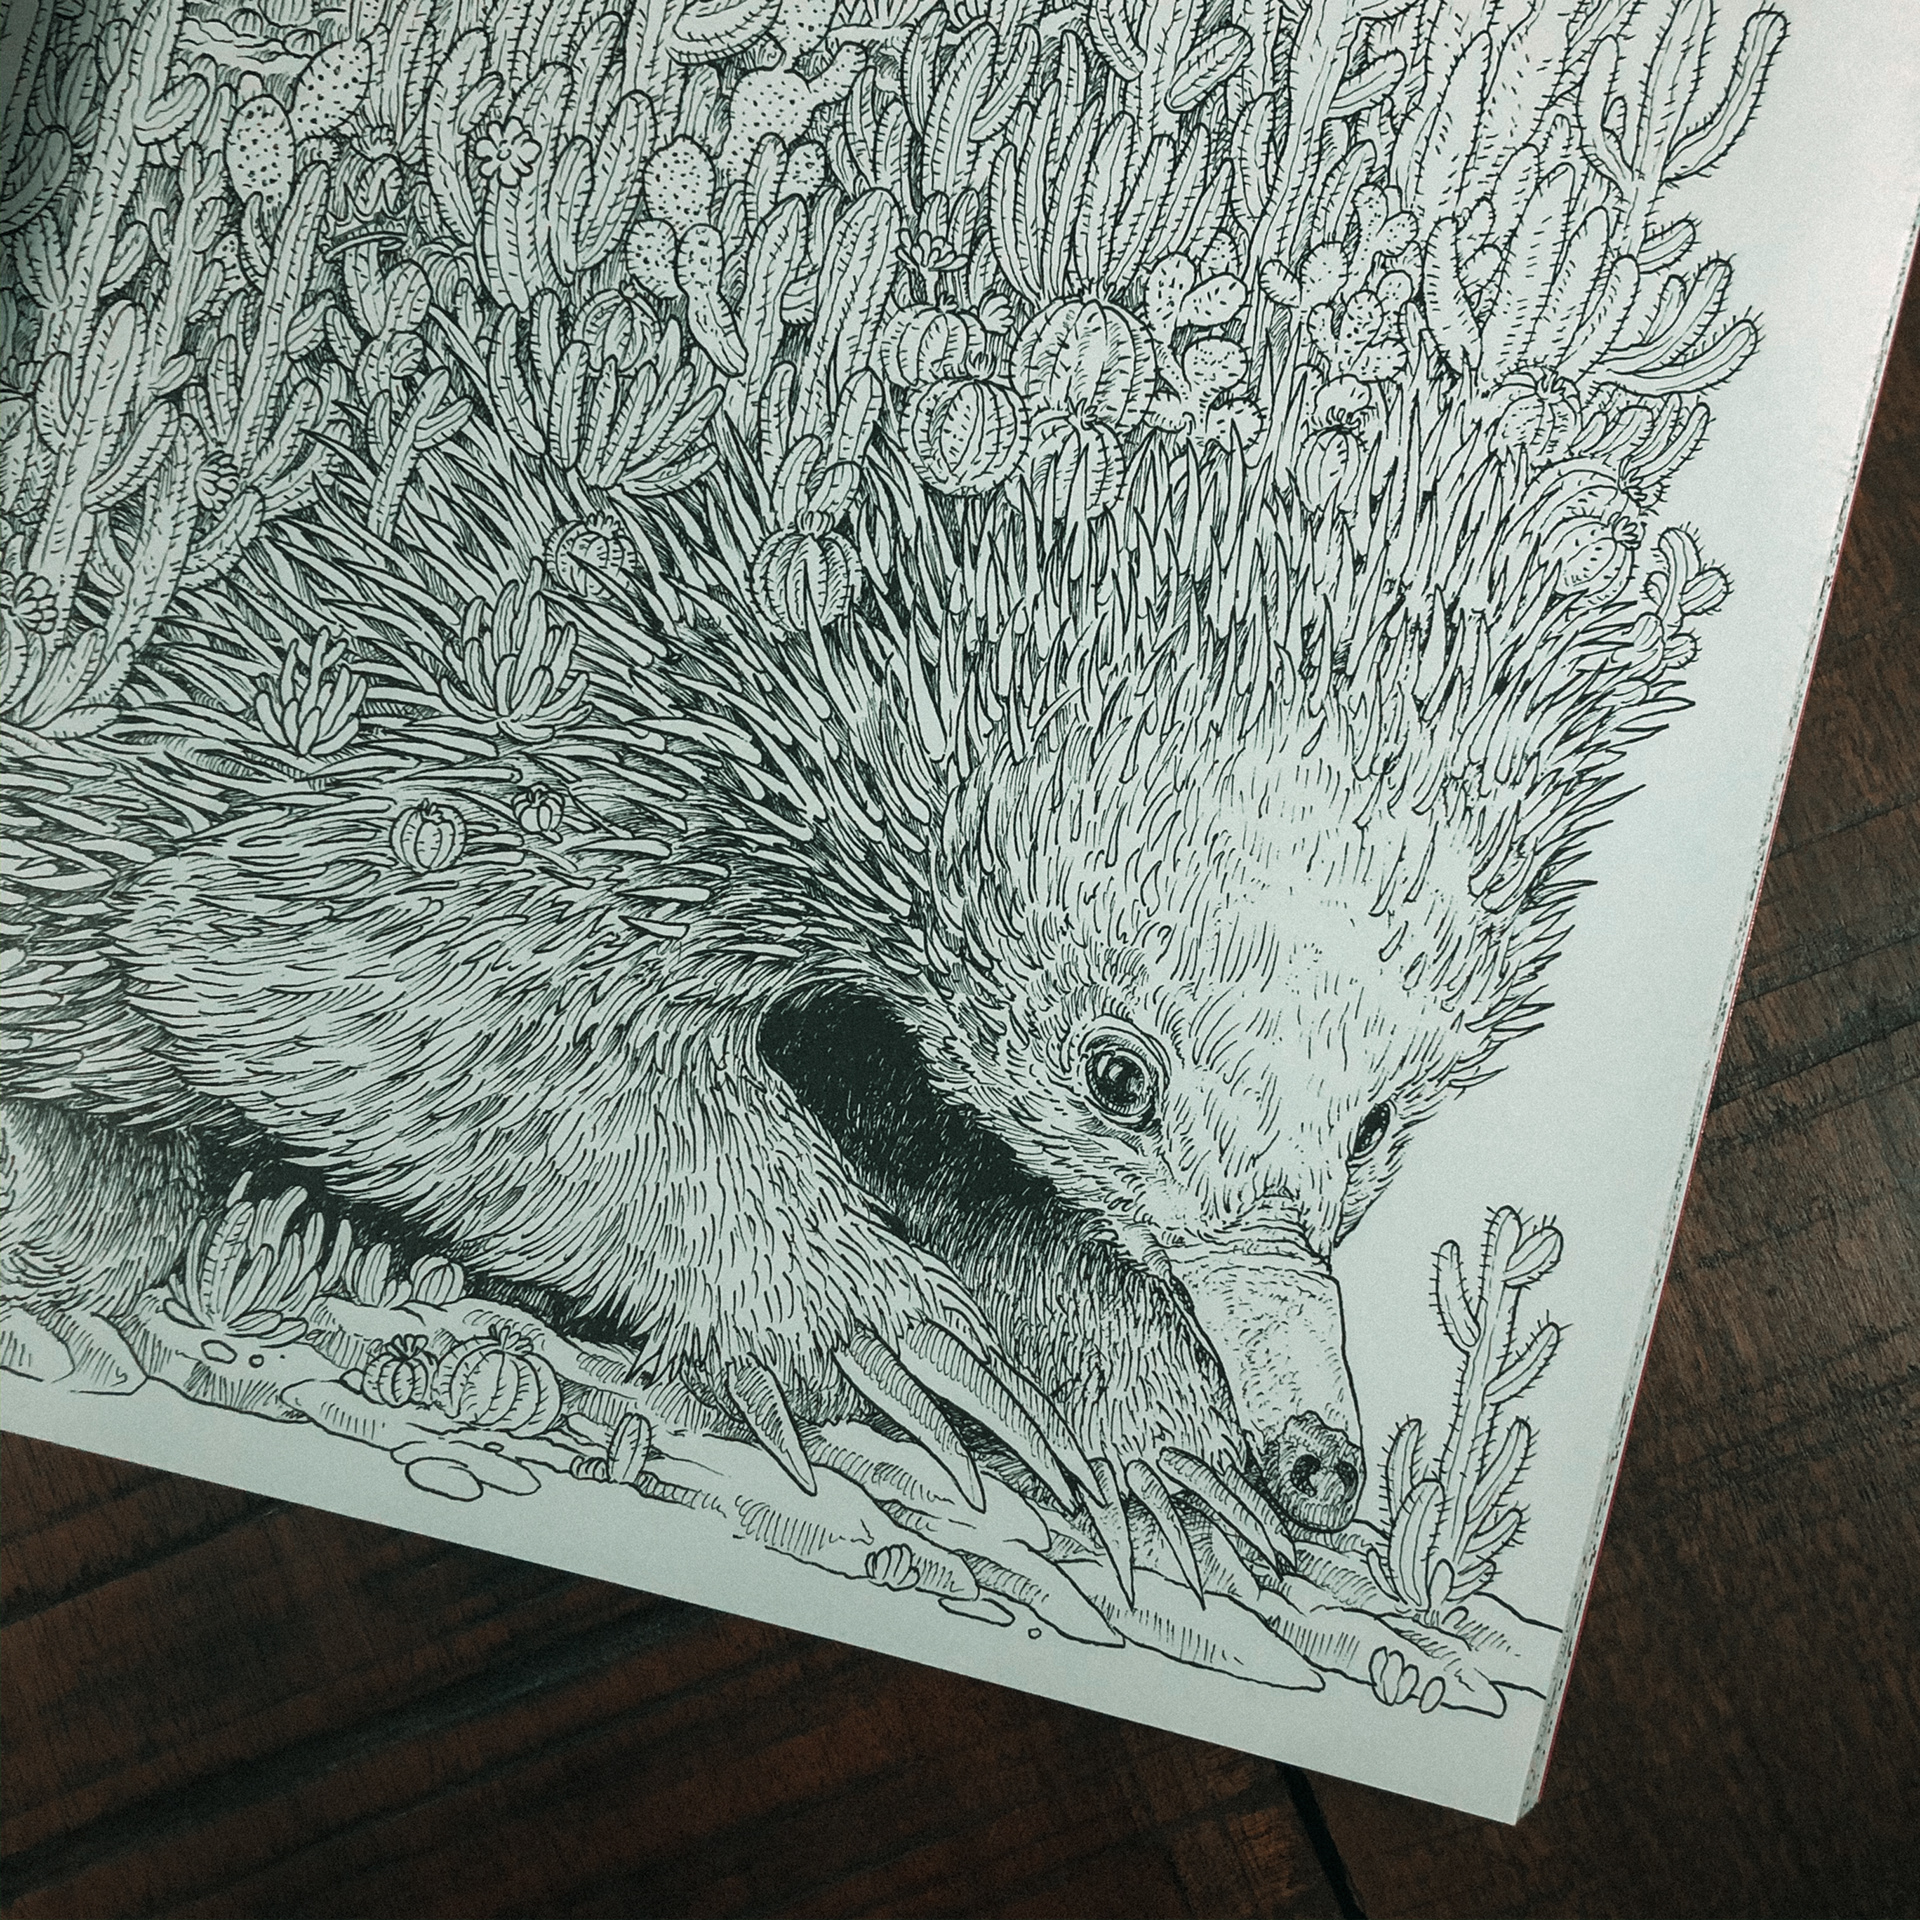 Worlds Within Worlds Coloring Book by Kerby Rosanes — Tools and Toys